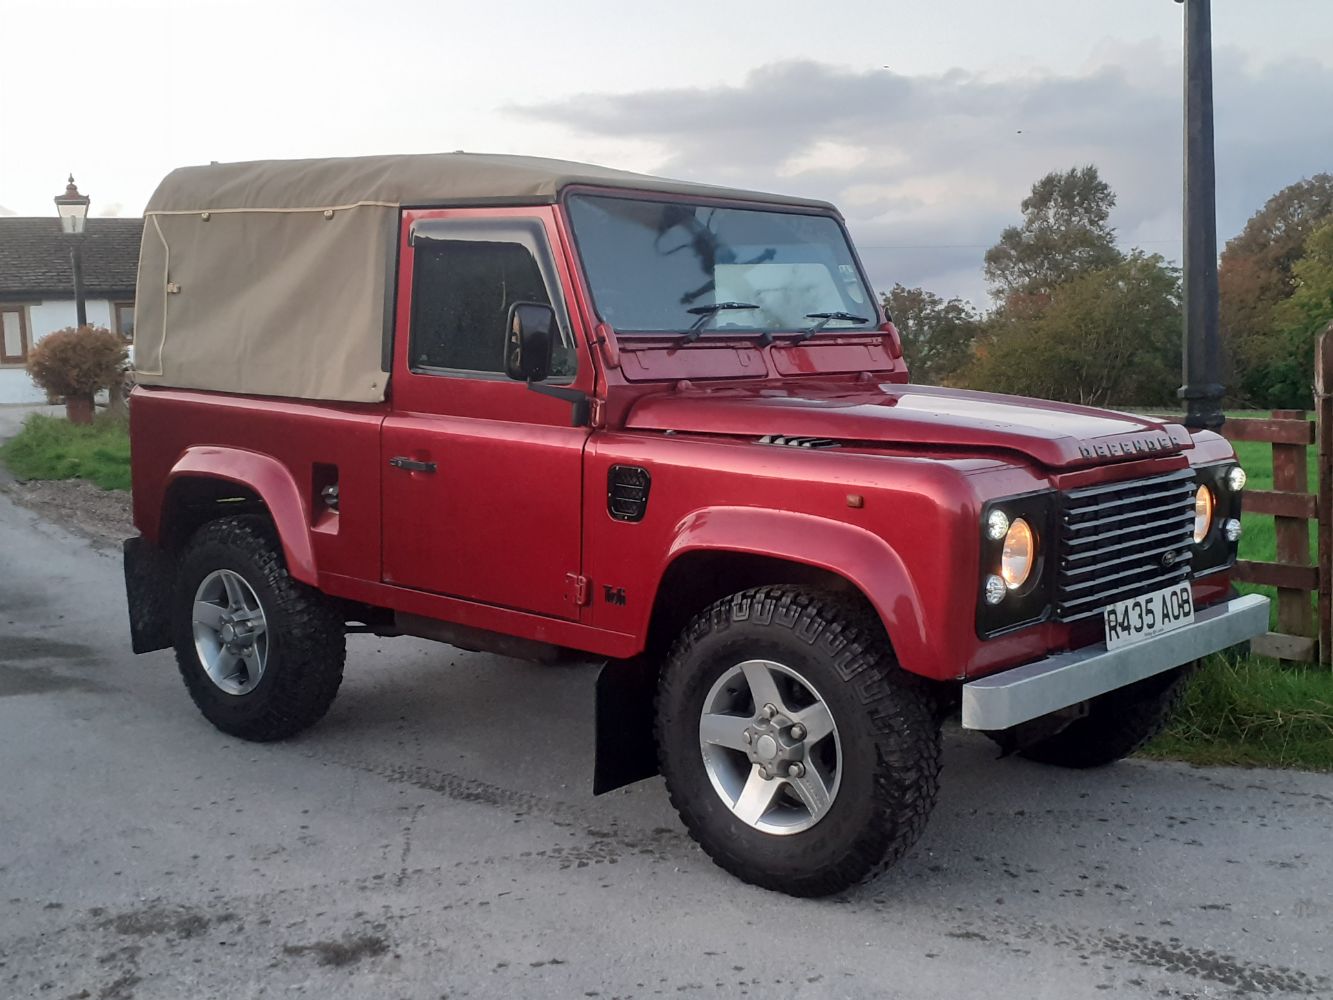 1998 DEFENDER CONVERTIBLE, JCB 8018 CTS DIGGER, 2020 MOWERS, PORSCHE GT3'S, BENTLEY, RANGE ROVER, HIGH VALUE CARS & 4X4'S ENDS SUNDAY FROM 7PM!